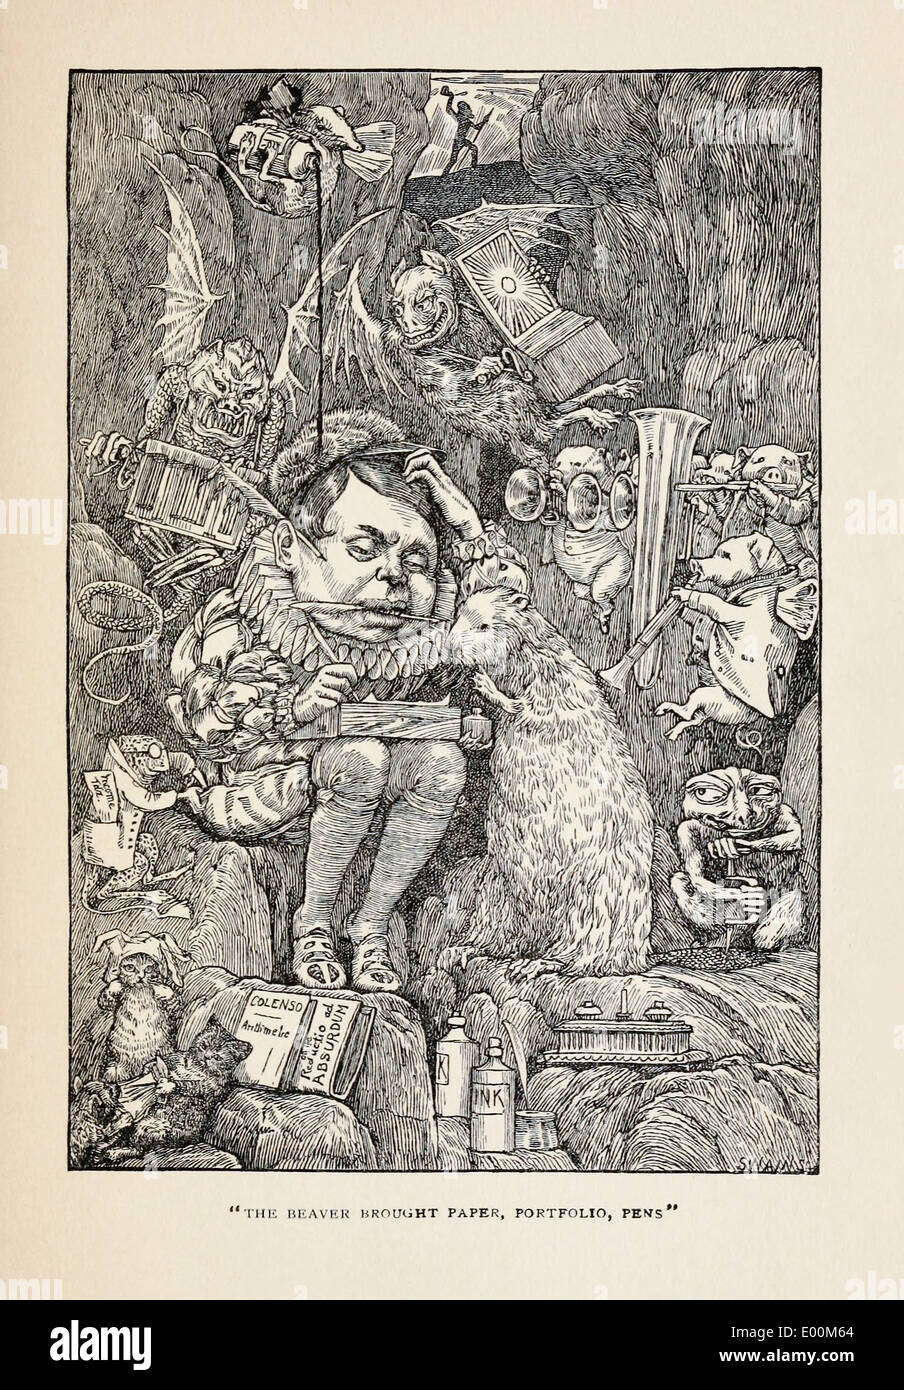 Henry Holiday (1839-1927) illustration from Lewis Carroll's 'The Hunting of the Snark – An Agony in Eight Fits’published in 1876 Stock Photo